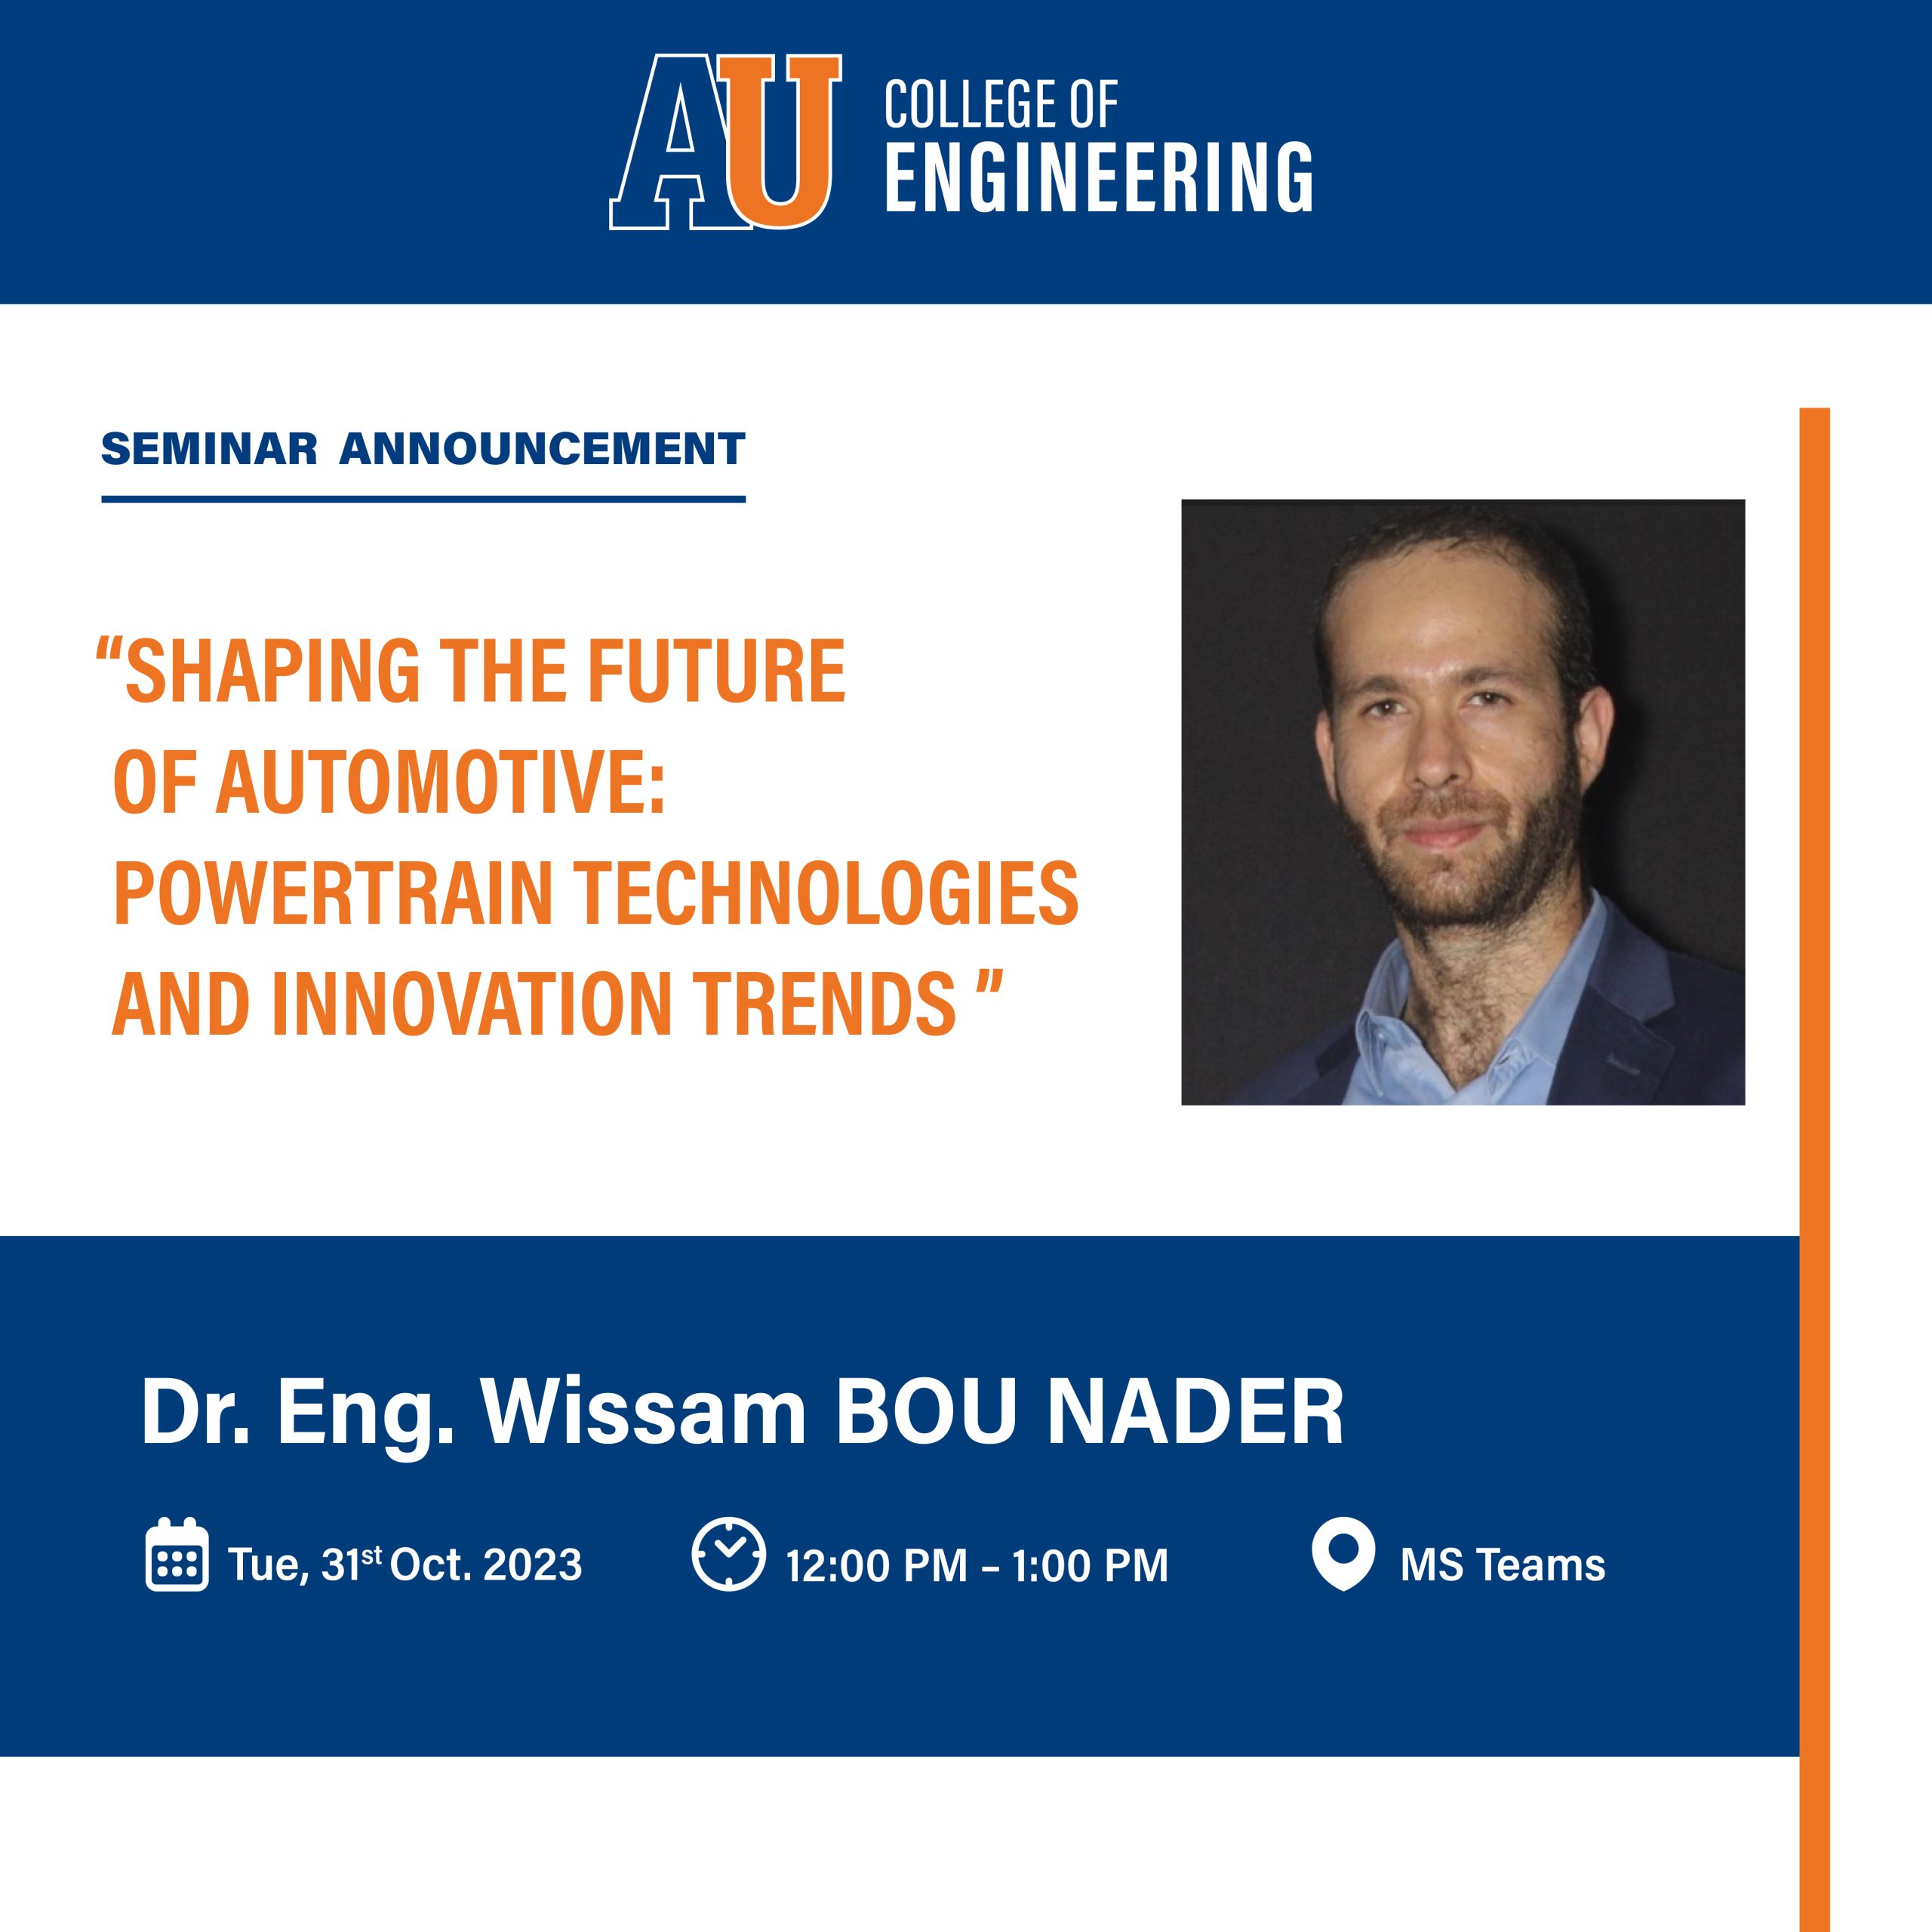 SHAPING THE FUTURE OF AUTOMOTIVE: POWERTRAIN TECHNOLOGIES AND INNOVATION TRENDS